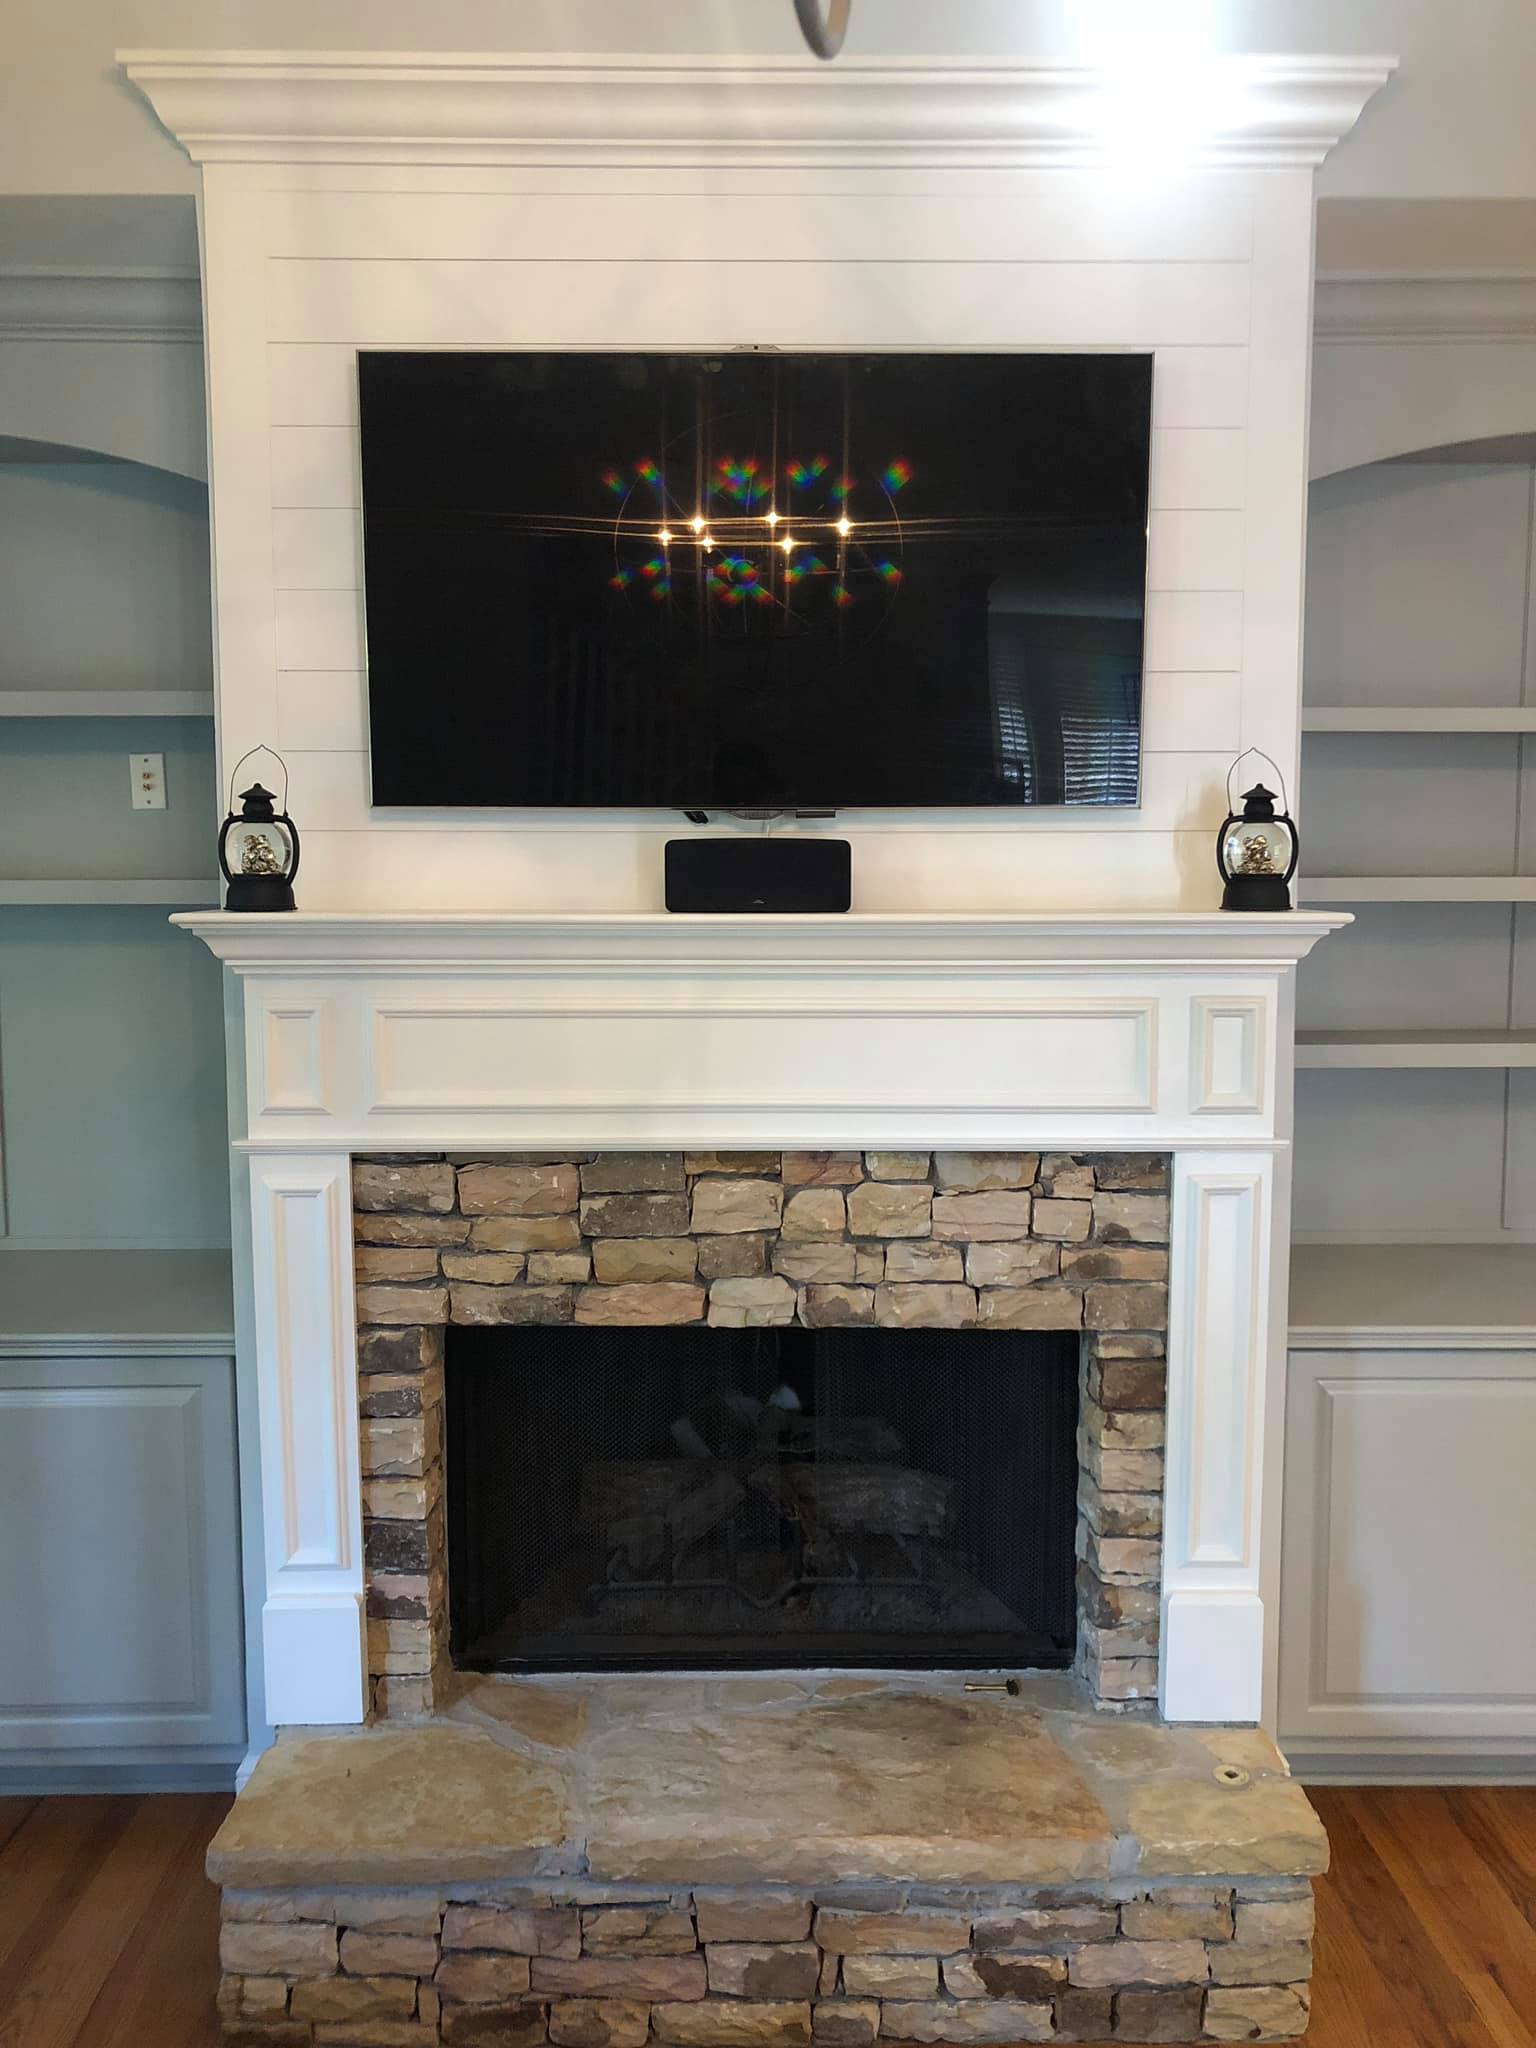 Fireplace with Mantel and Wall High Built in Cabinets with Double Doors Painted Grey 3